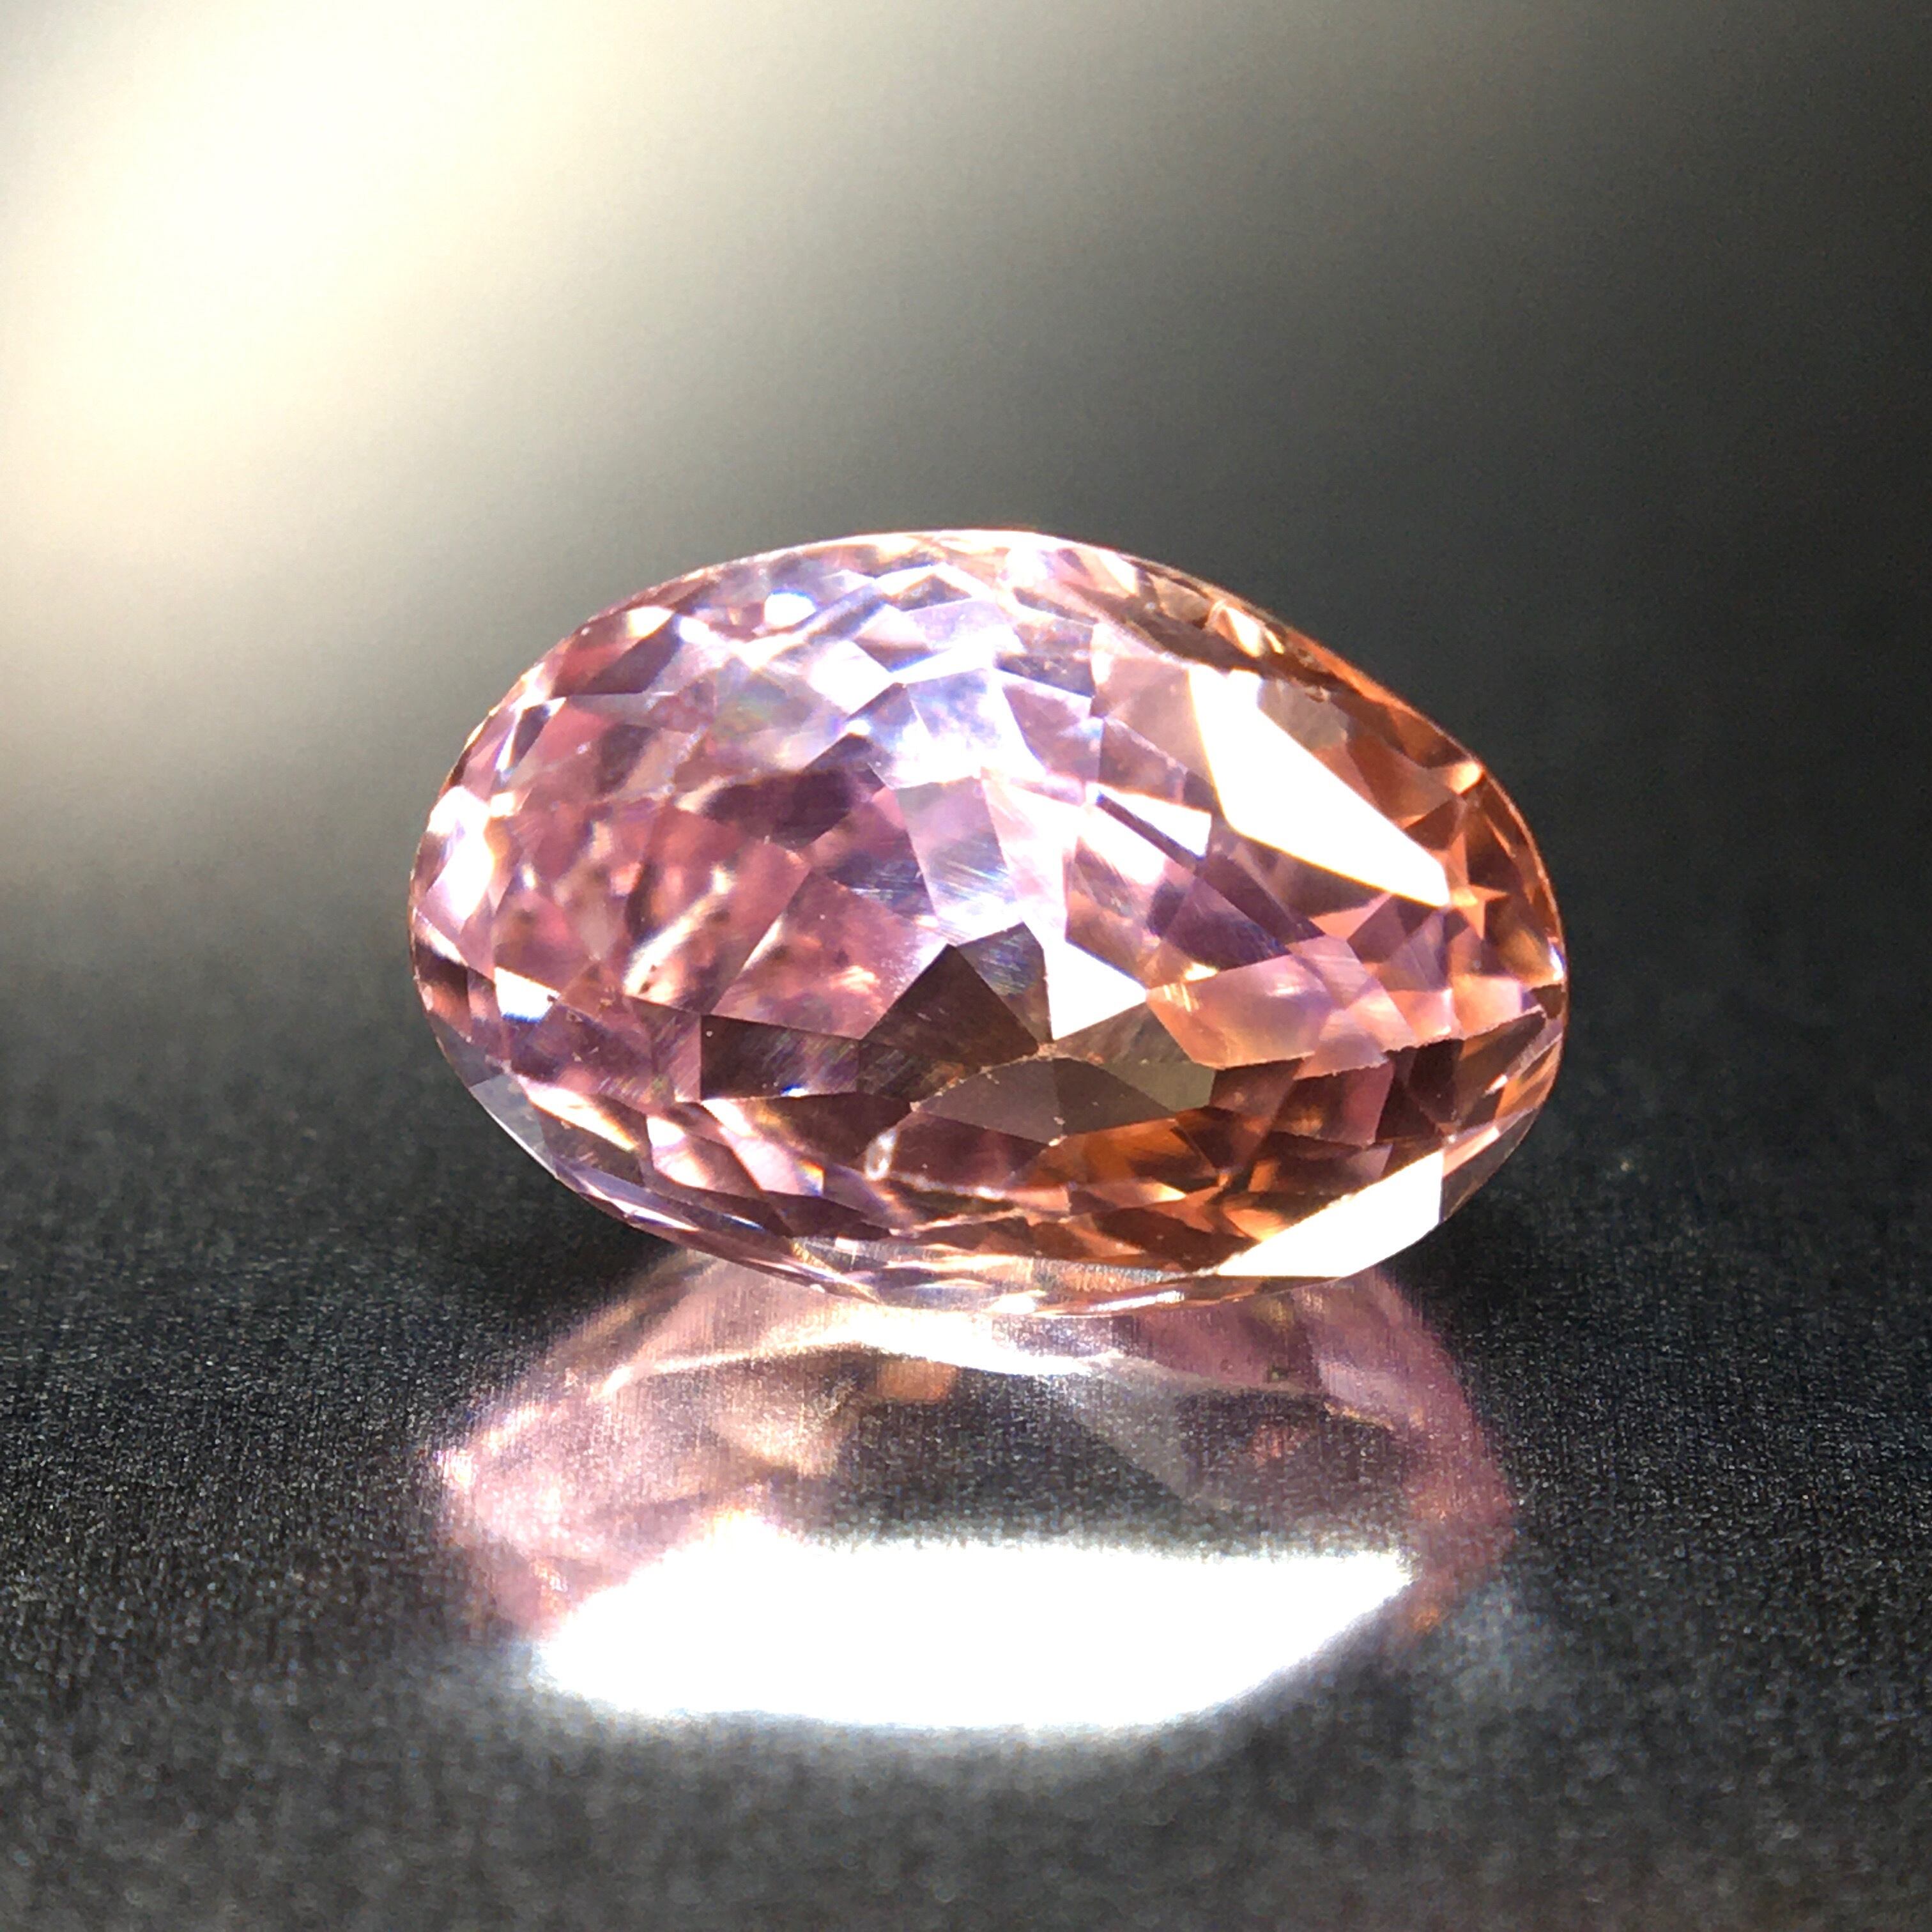 1.4ct UP オレンジとピンクの”凛”とした輝き 天然 非加熱 パパラチァサファイア | Frederick’s Gems&Jewelry  powered by BASE